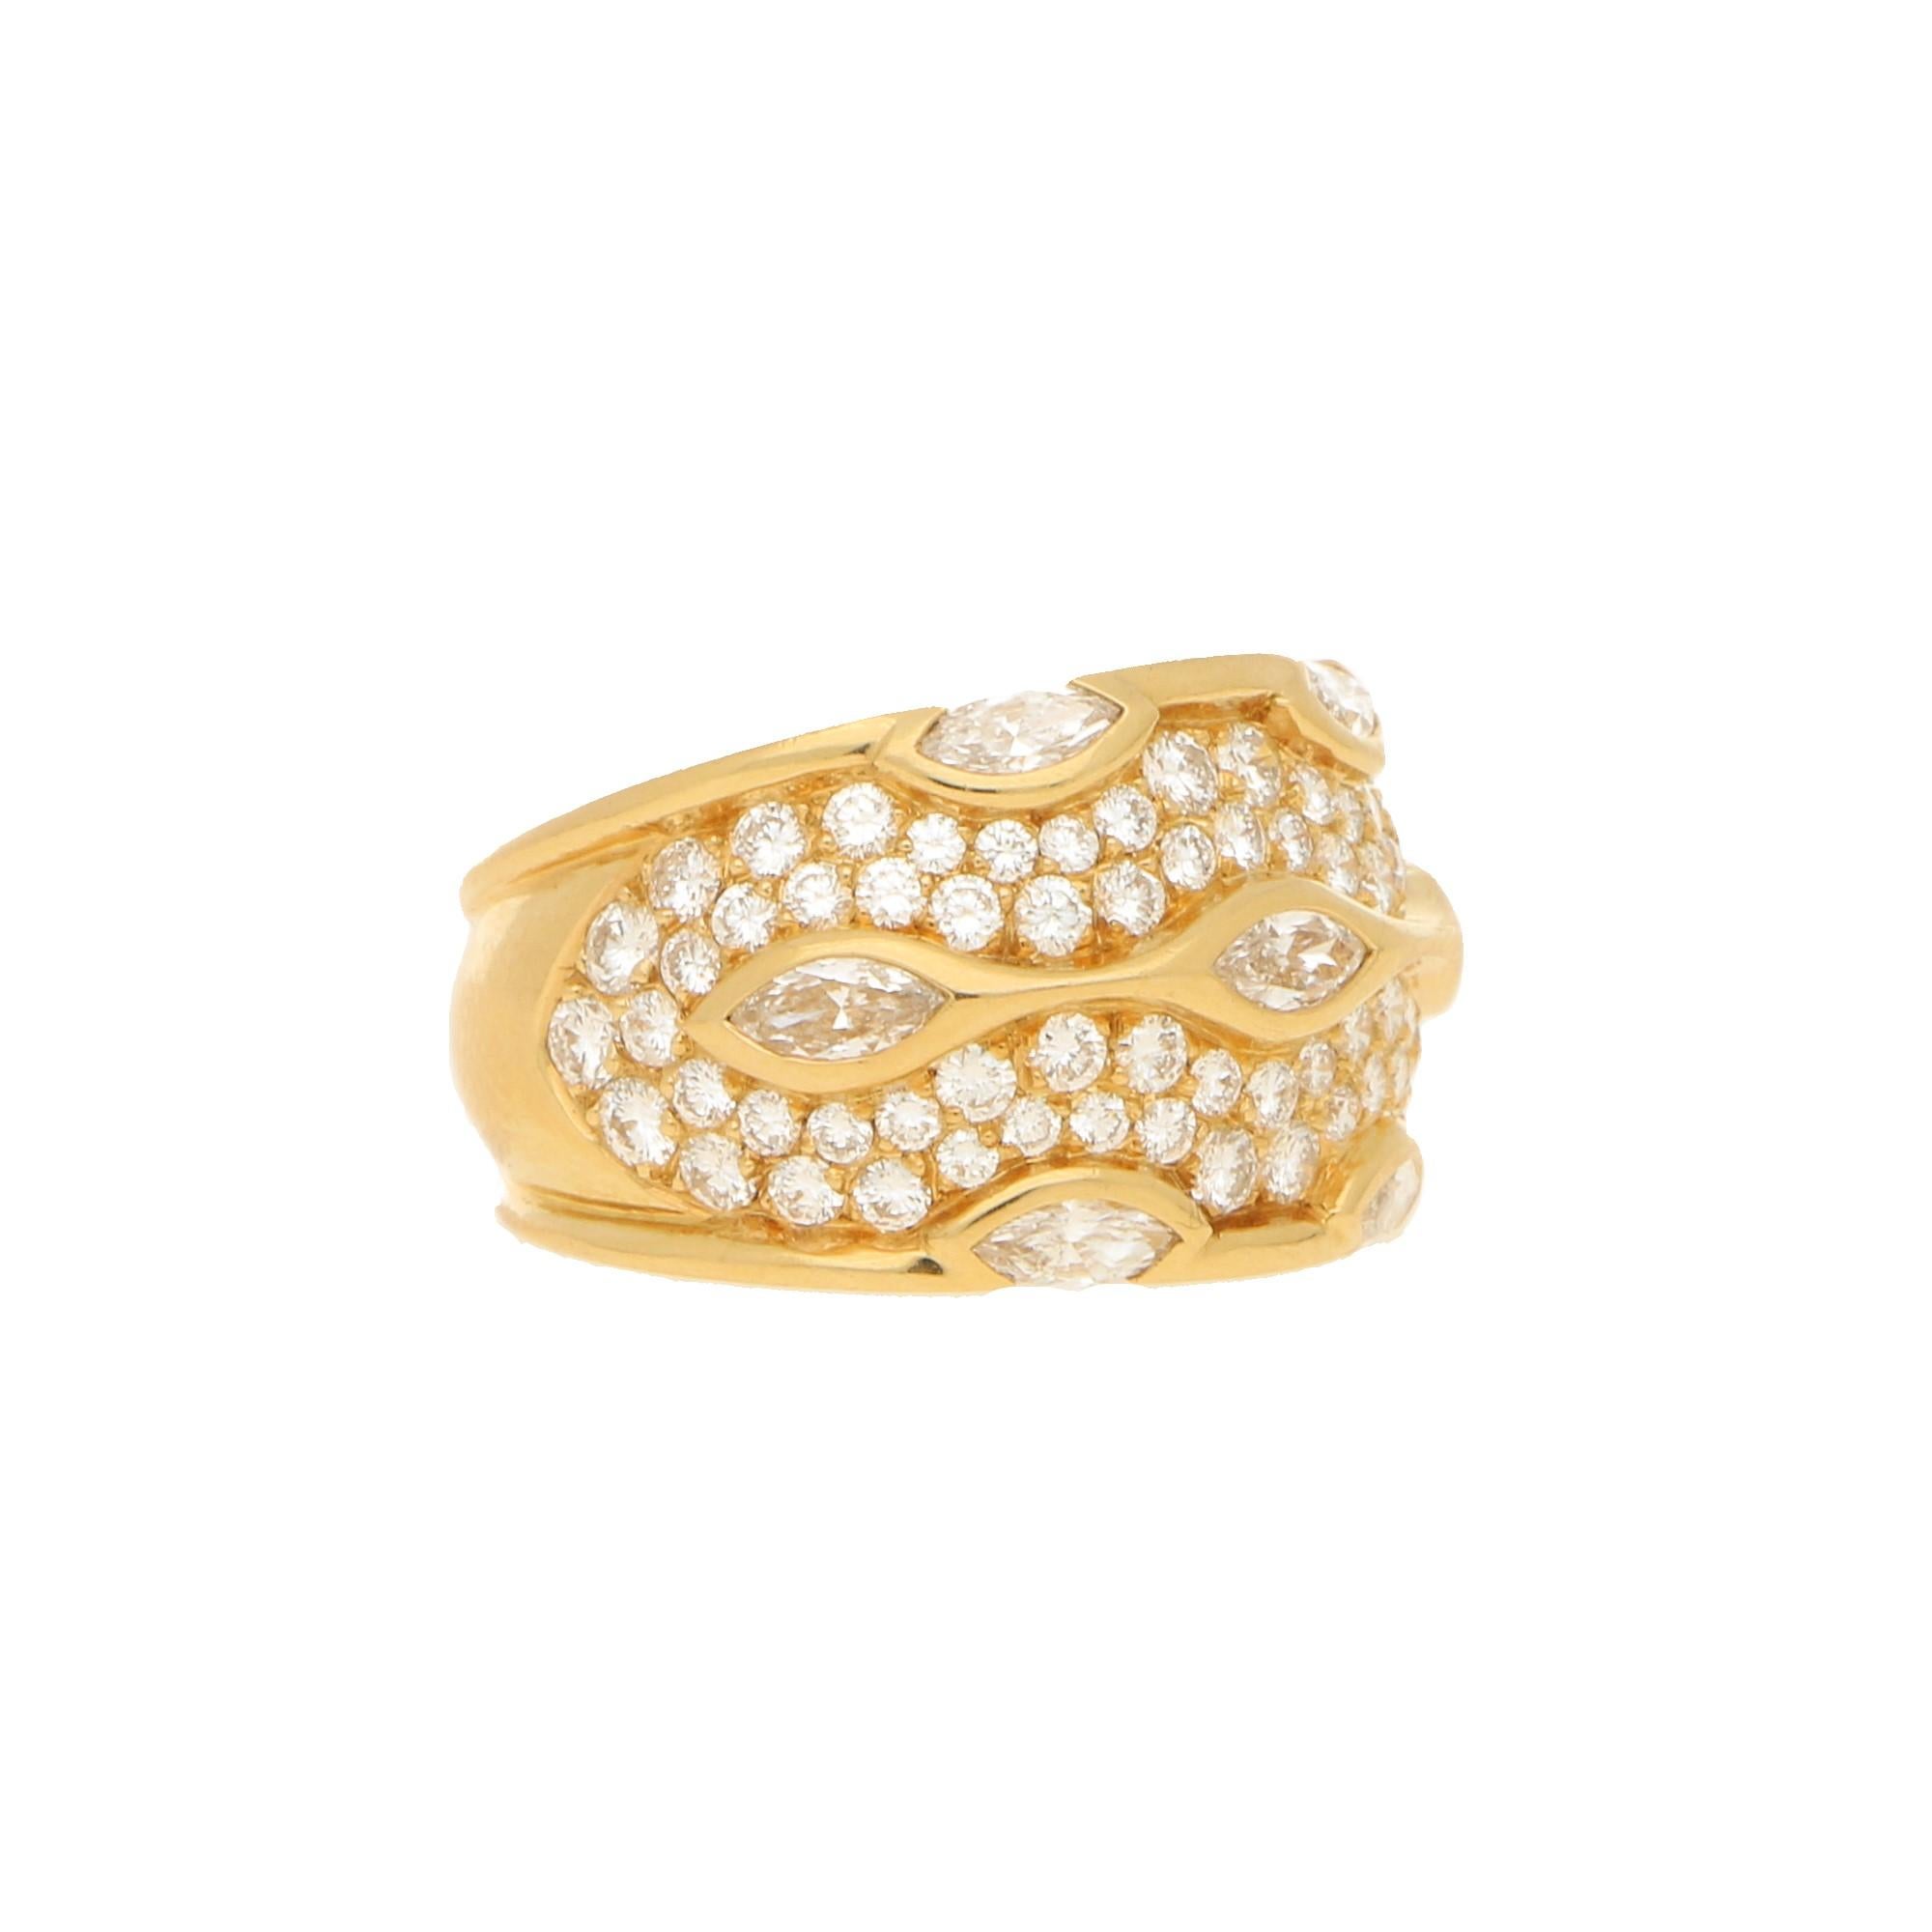 A beautiful Chaumet Paris diamond bombe ring set in 18k yellow gold.

The ring is pavé set throughout with 76 round brilliant cut diamonds. Set on top of the round diamonds are 7 single marquise cut diamonds which are all rub over set securely in